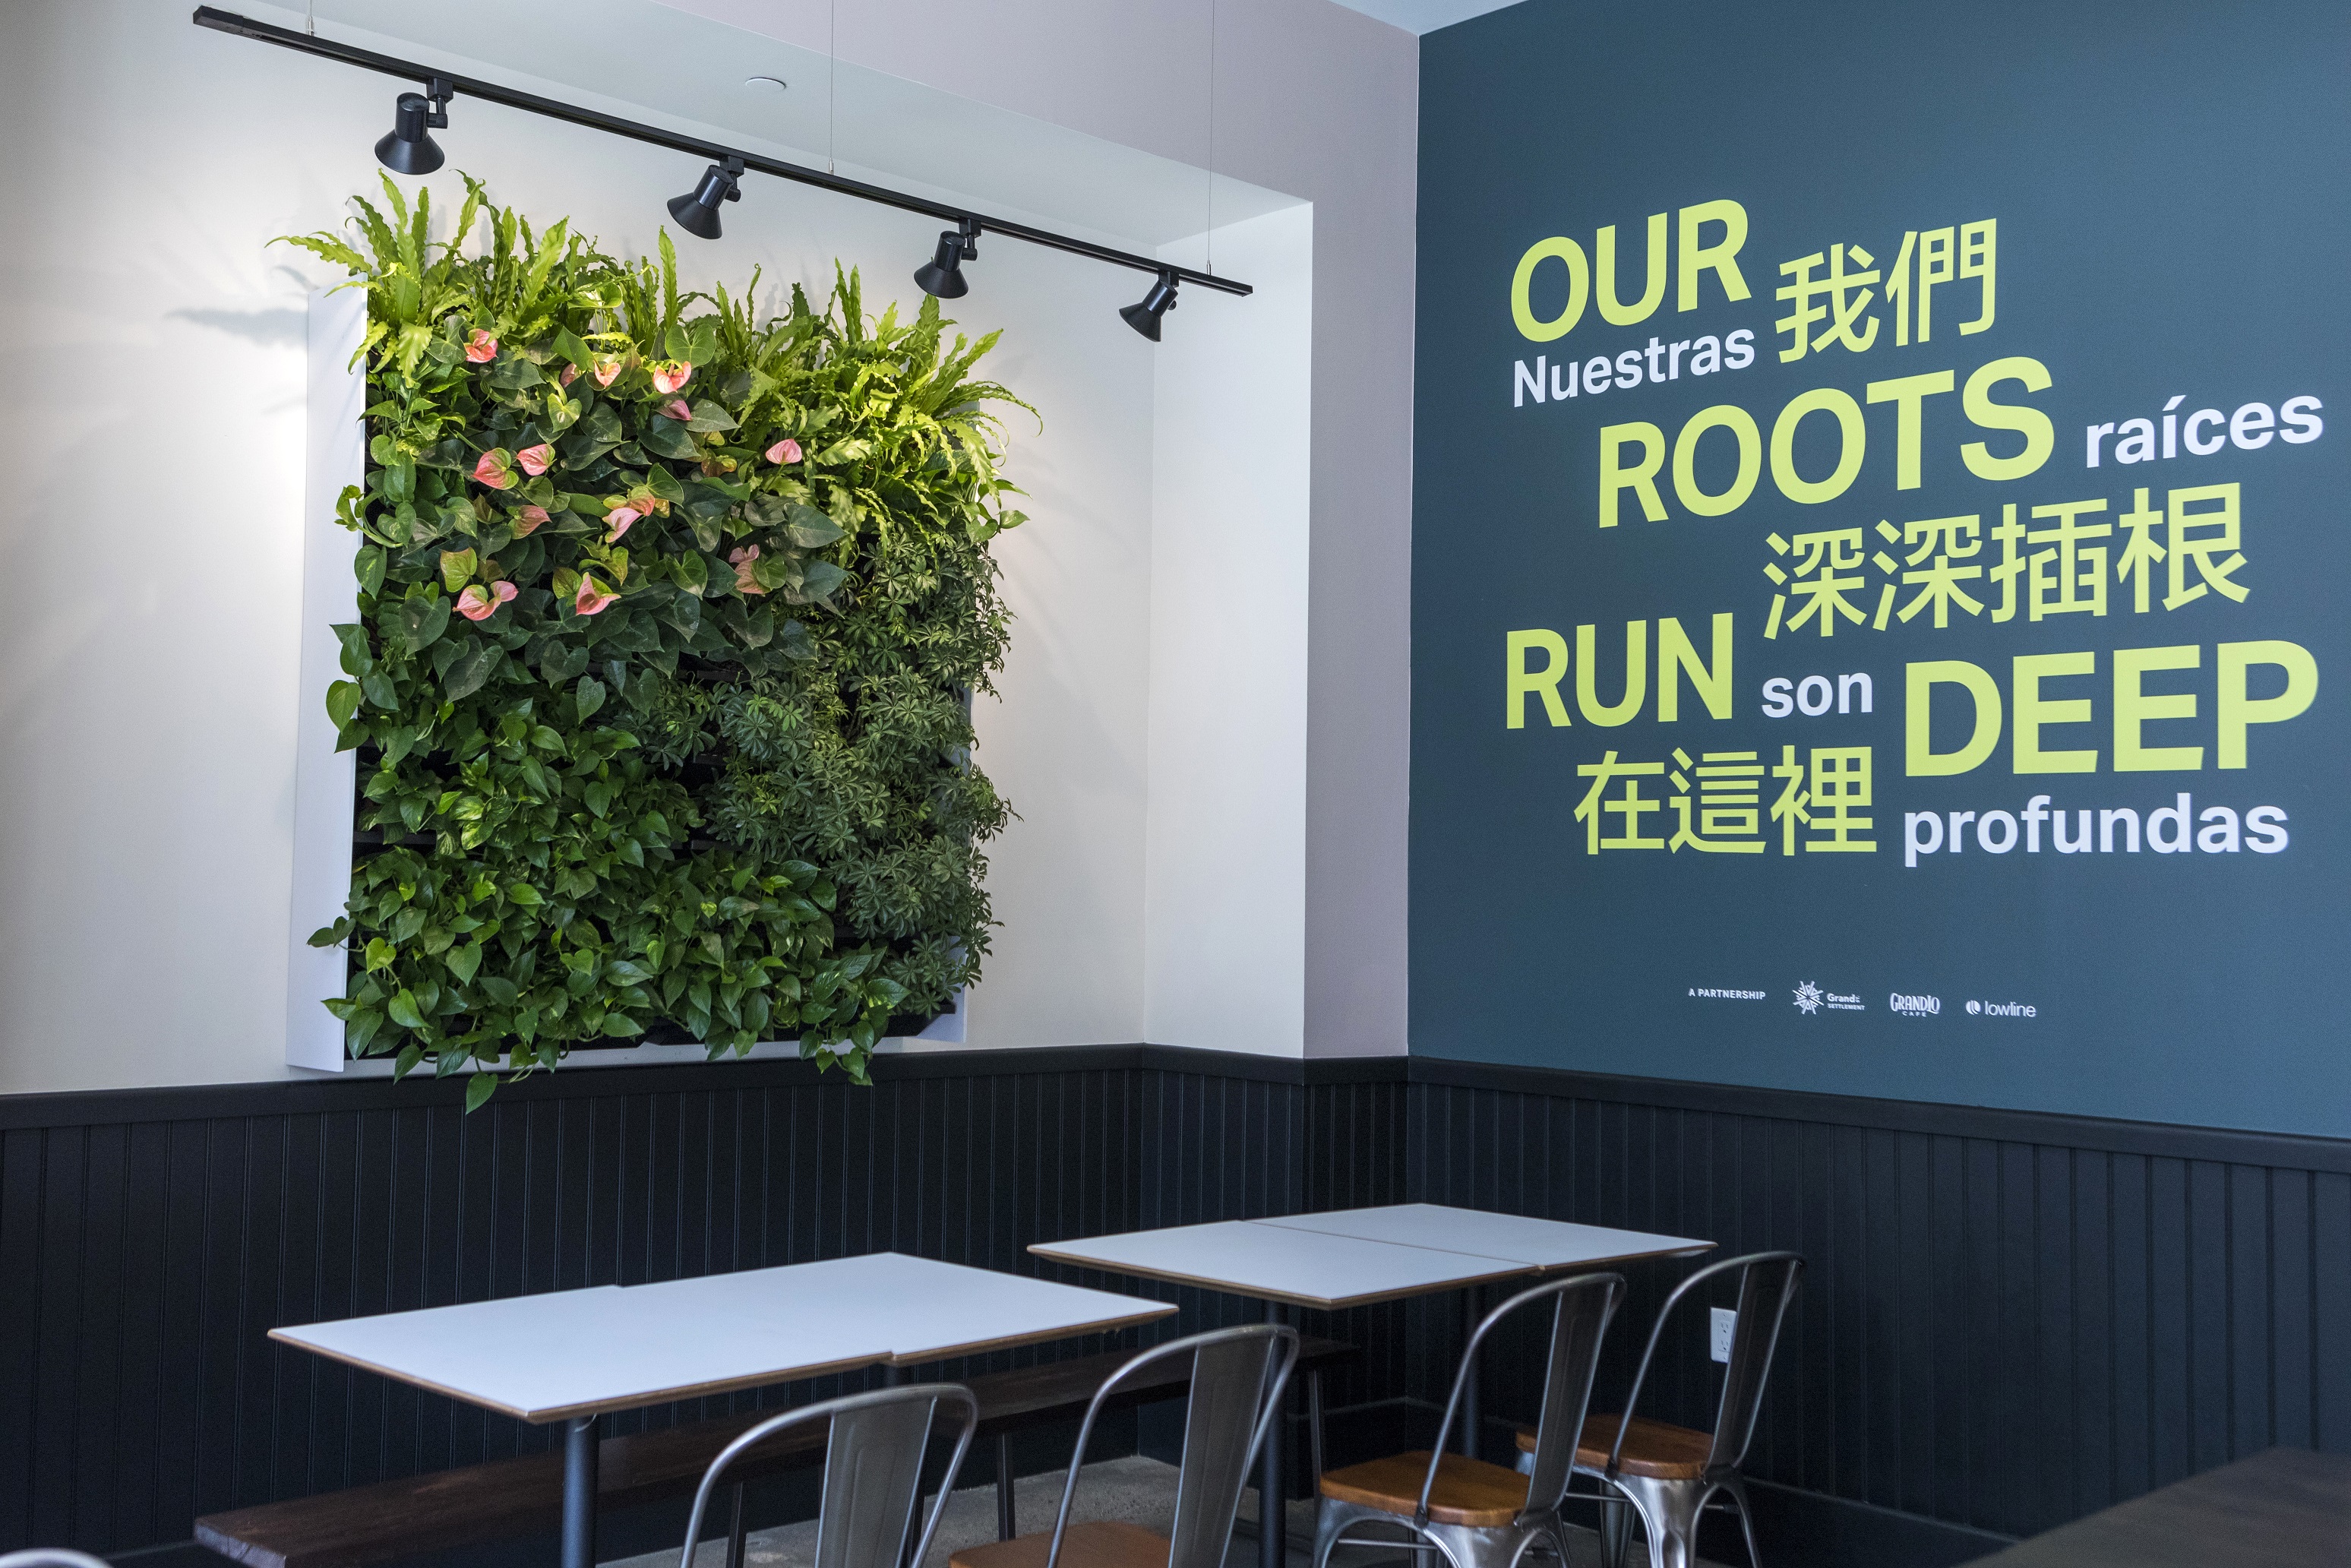 The introduction of crisp green plants into this café create a great conversation piece as customers catch up with friends.